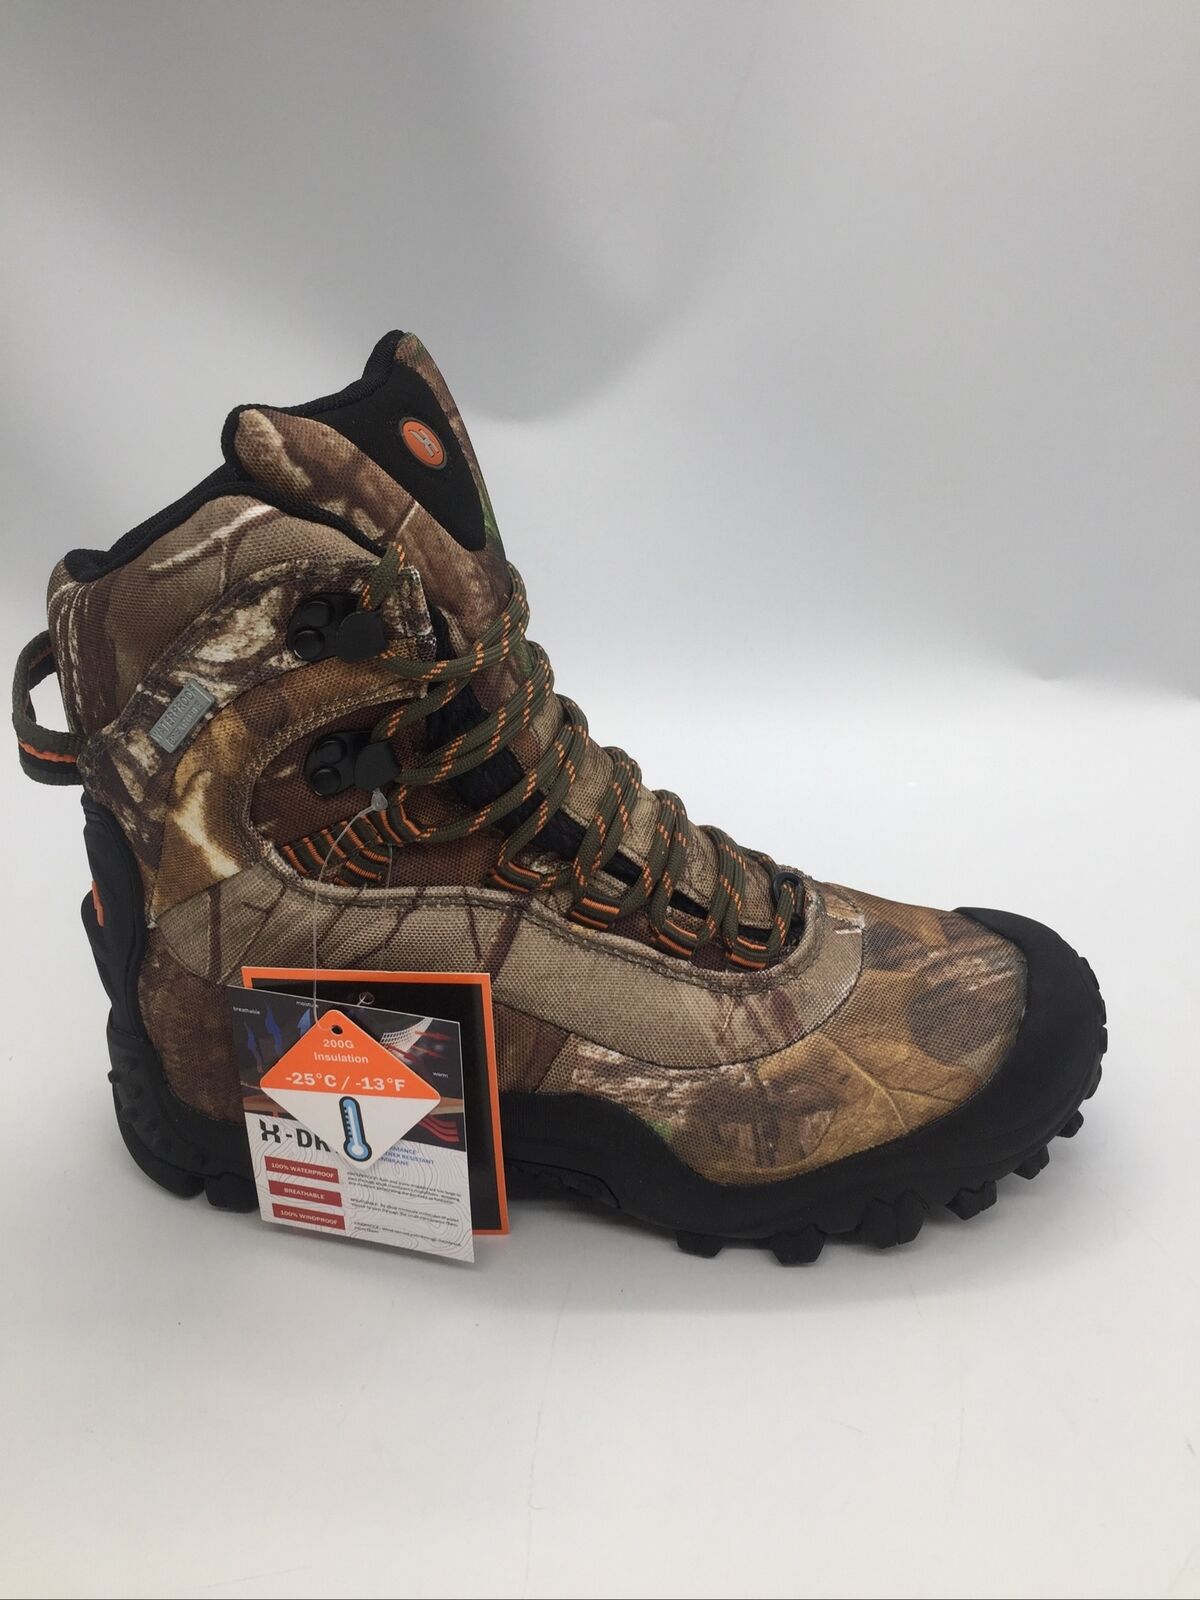 XPETI - Men’s Thermator Mid-Rise Waterproof Hiking Boot - Insulated - Camo Print